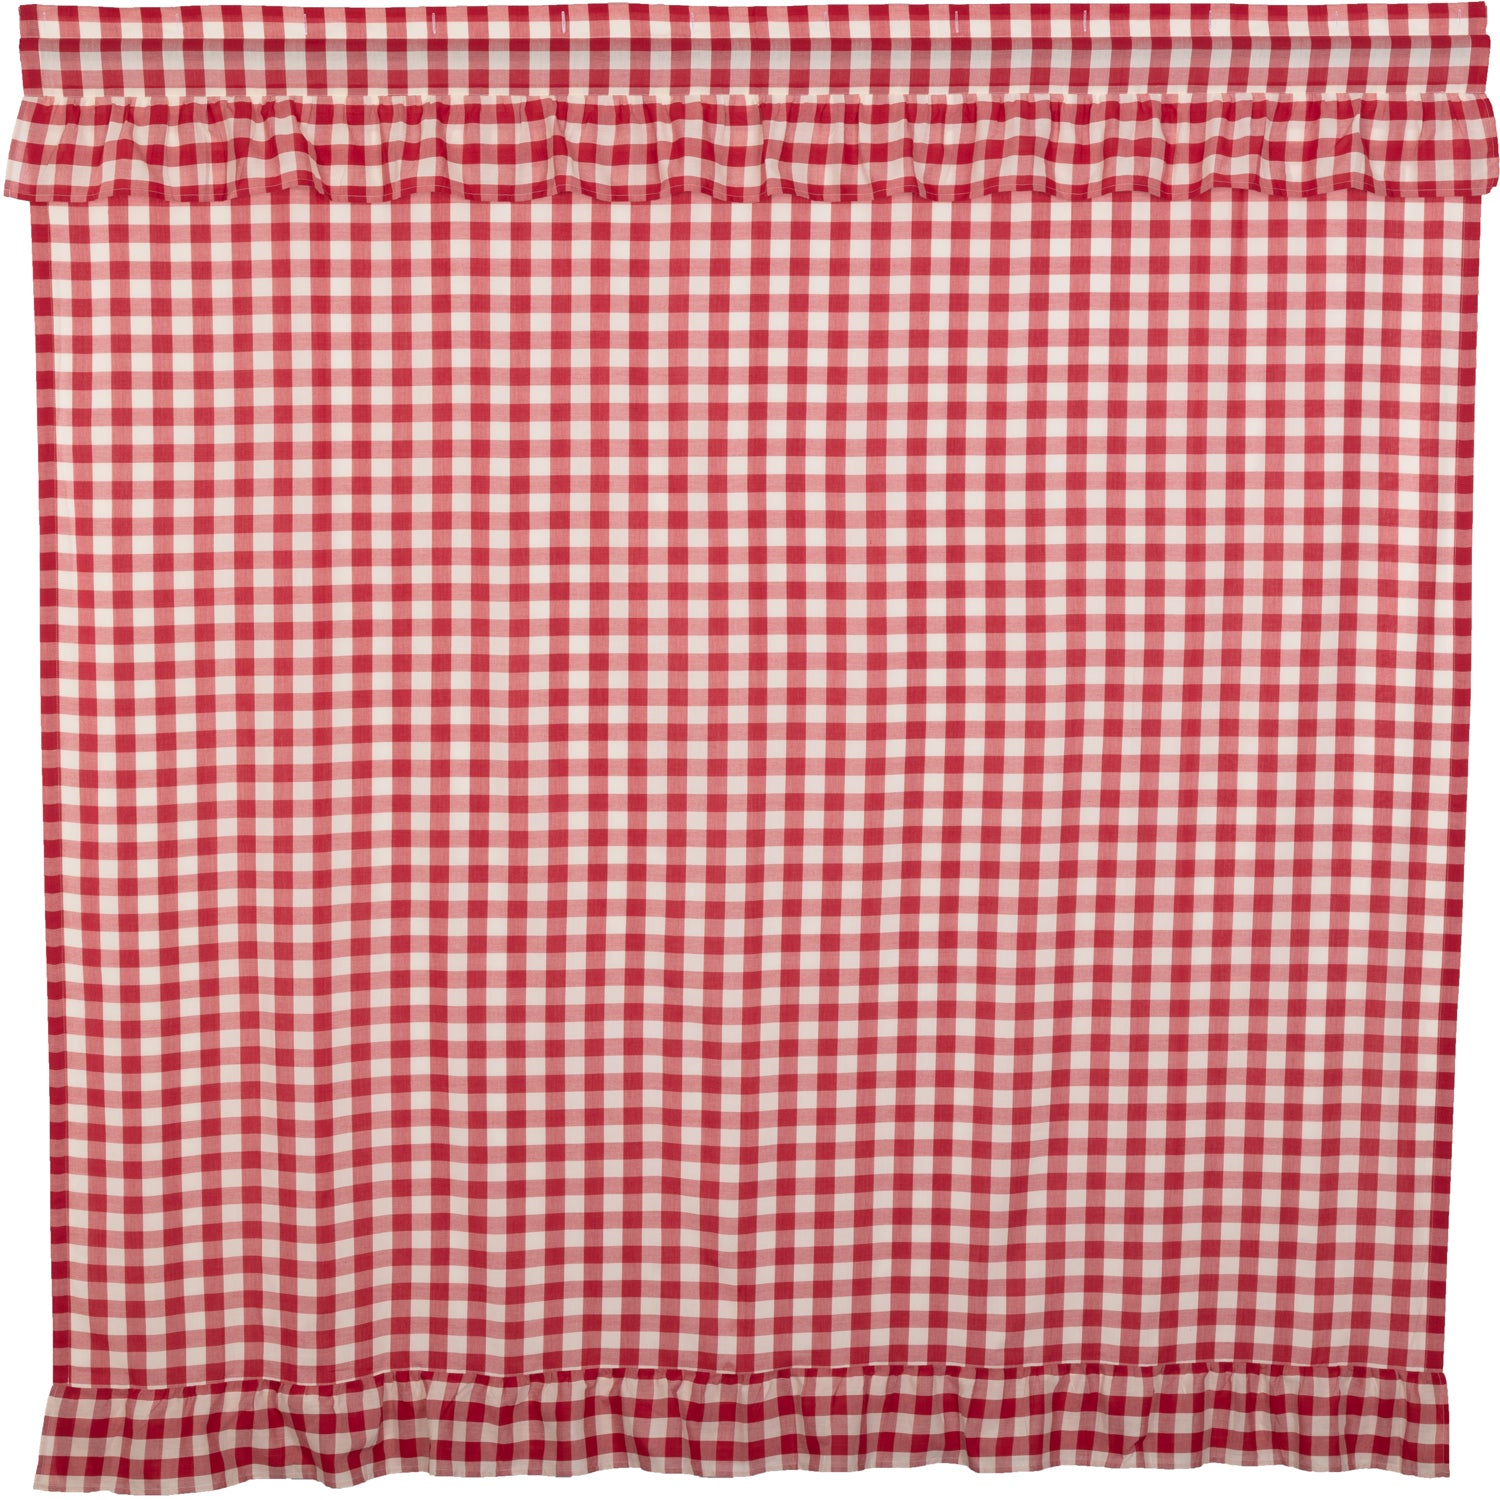 April & Olive Annie Buffalo Red Check Ruffled Shower Curtain 72x72 By VHC Brands